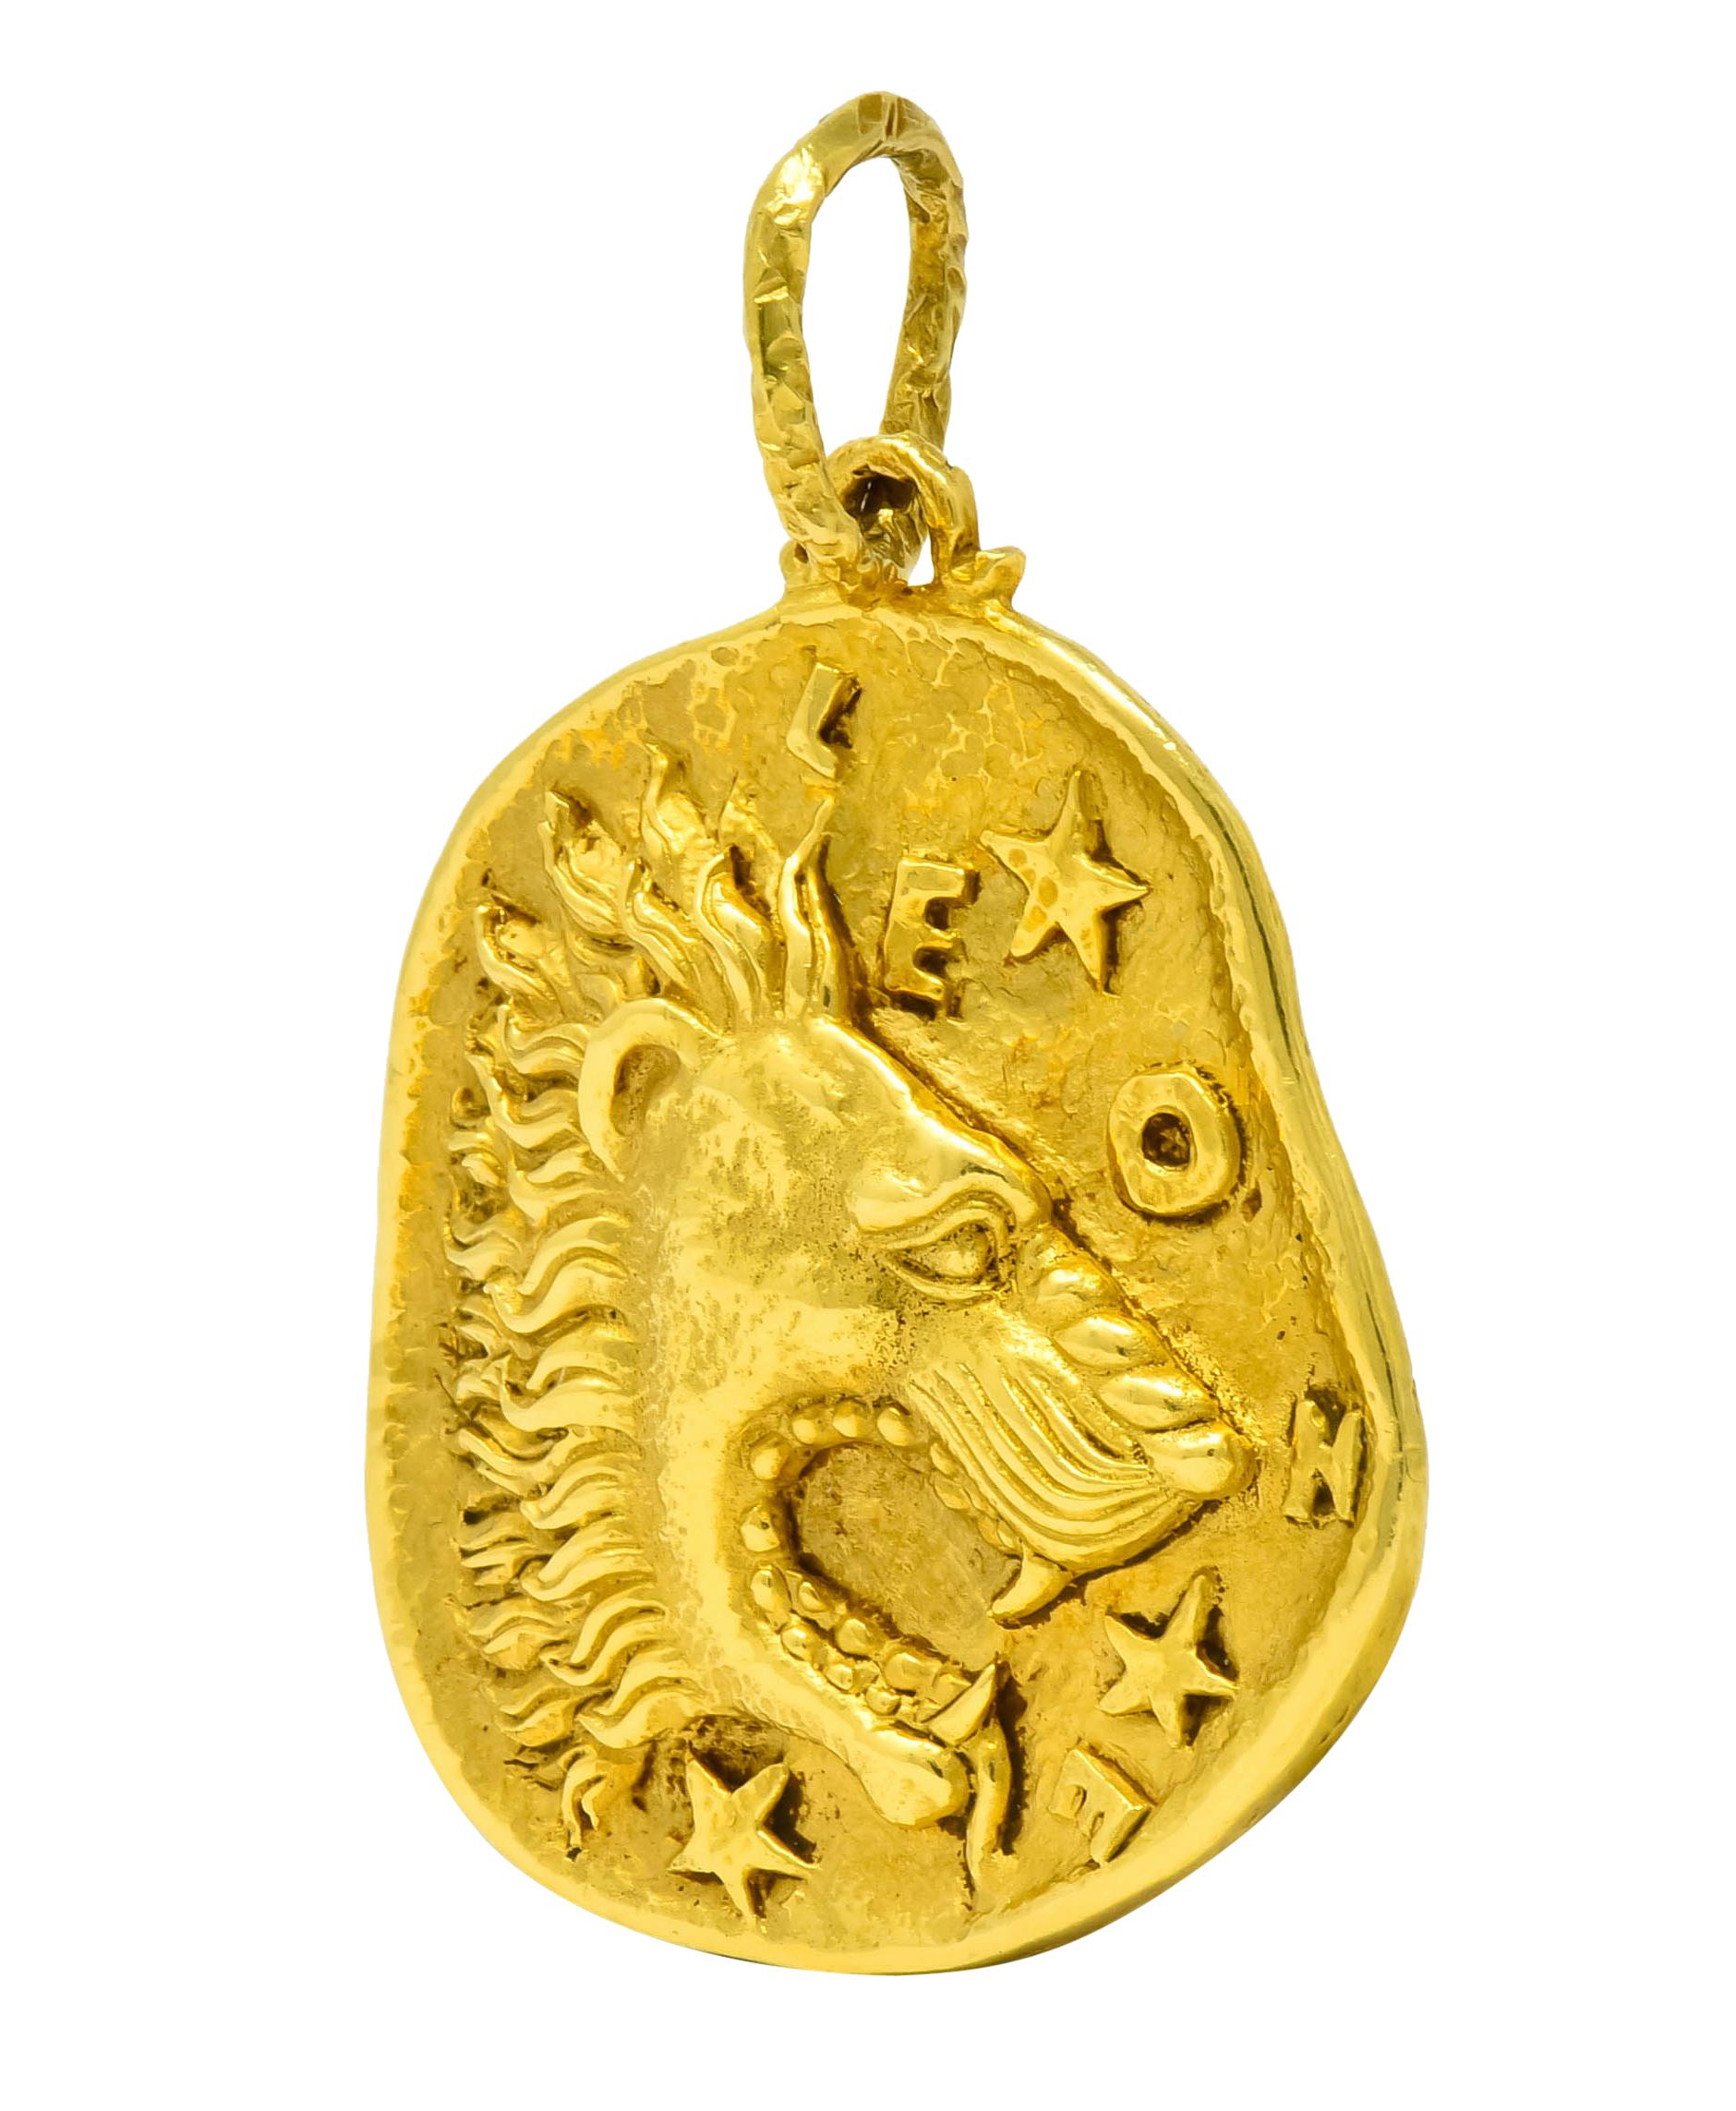 Centering a ferocious raised lion representing Leo zodiac sign in high polished and matte gold

Textured 